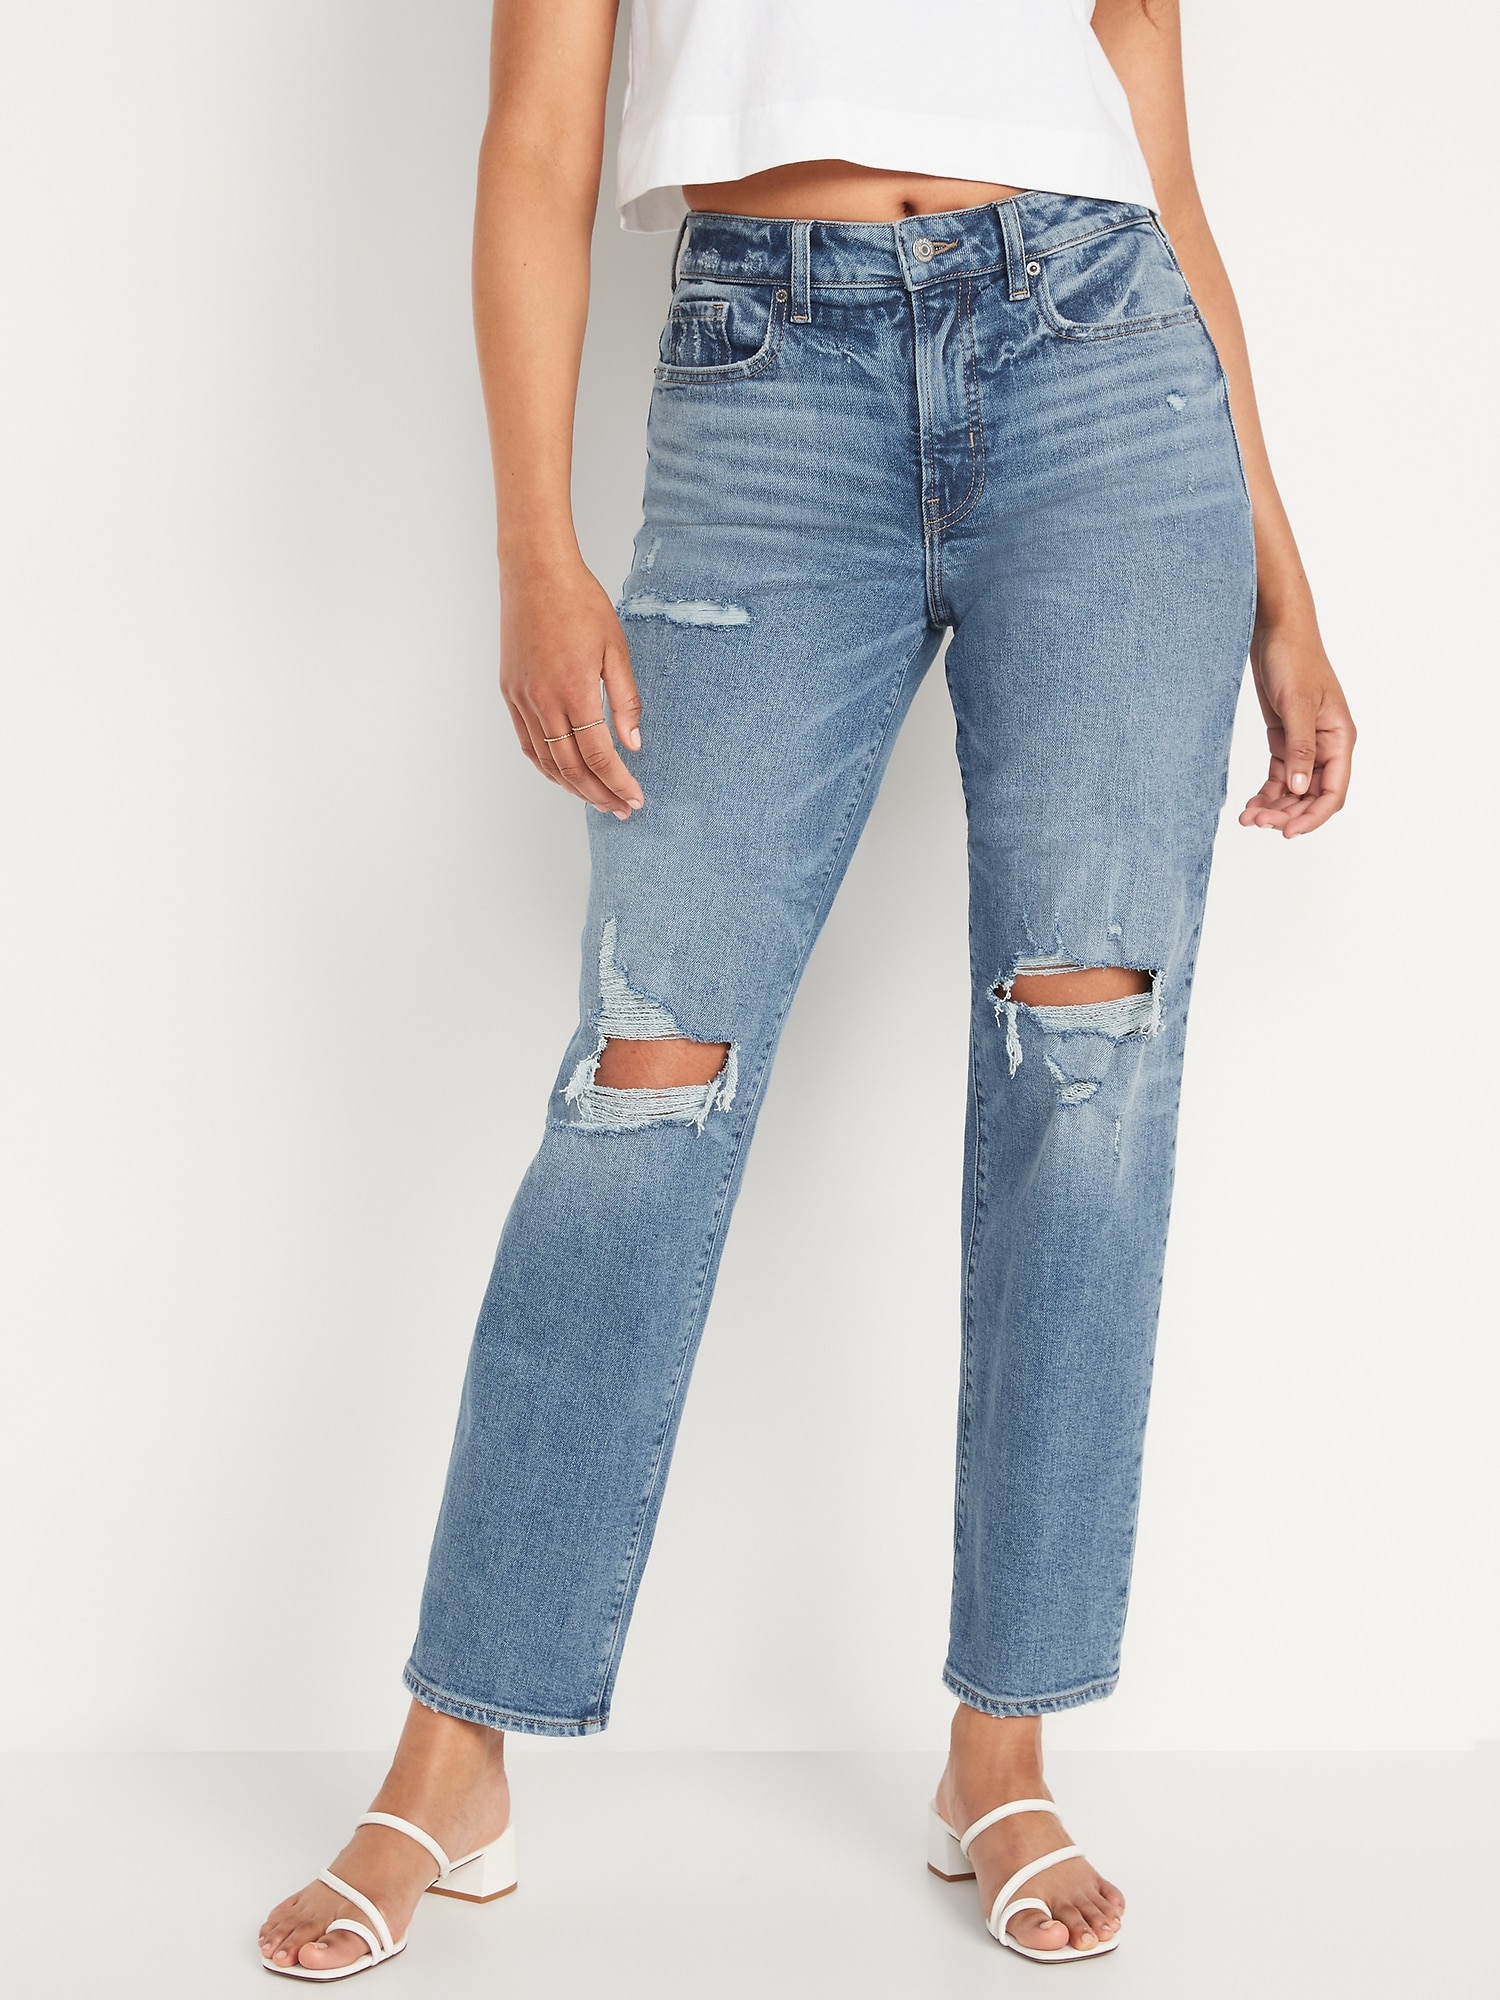 Old Navy High-Waisted Kicker Bootcut Ripped Jeans Review